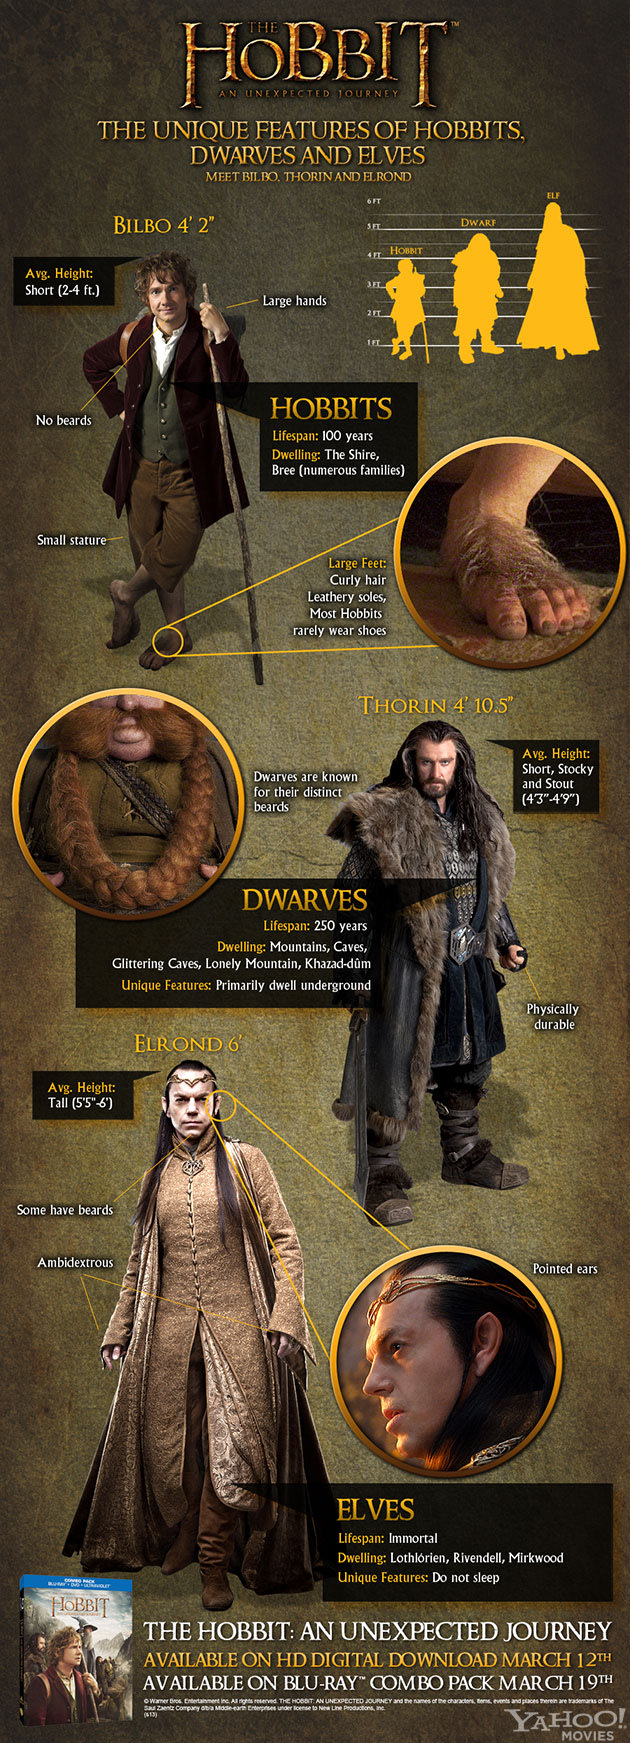 'An Unexpected Journey' in theatres | SPOILER THREAD - Page 23 Hobbit-infographic-blog630-jpg_223713